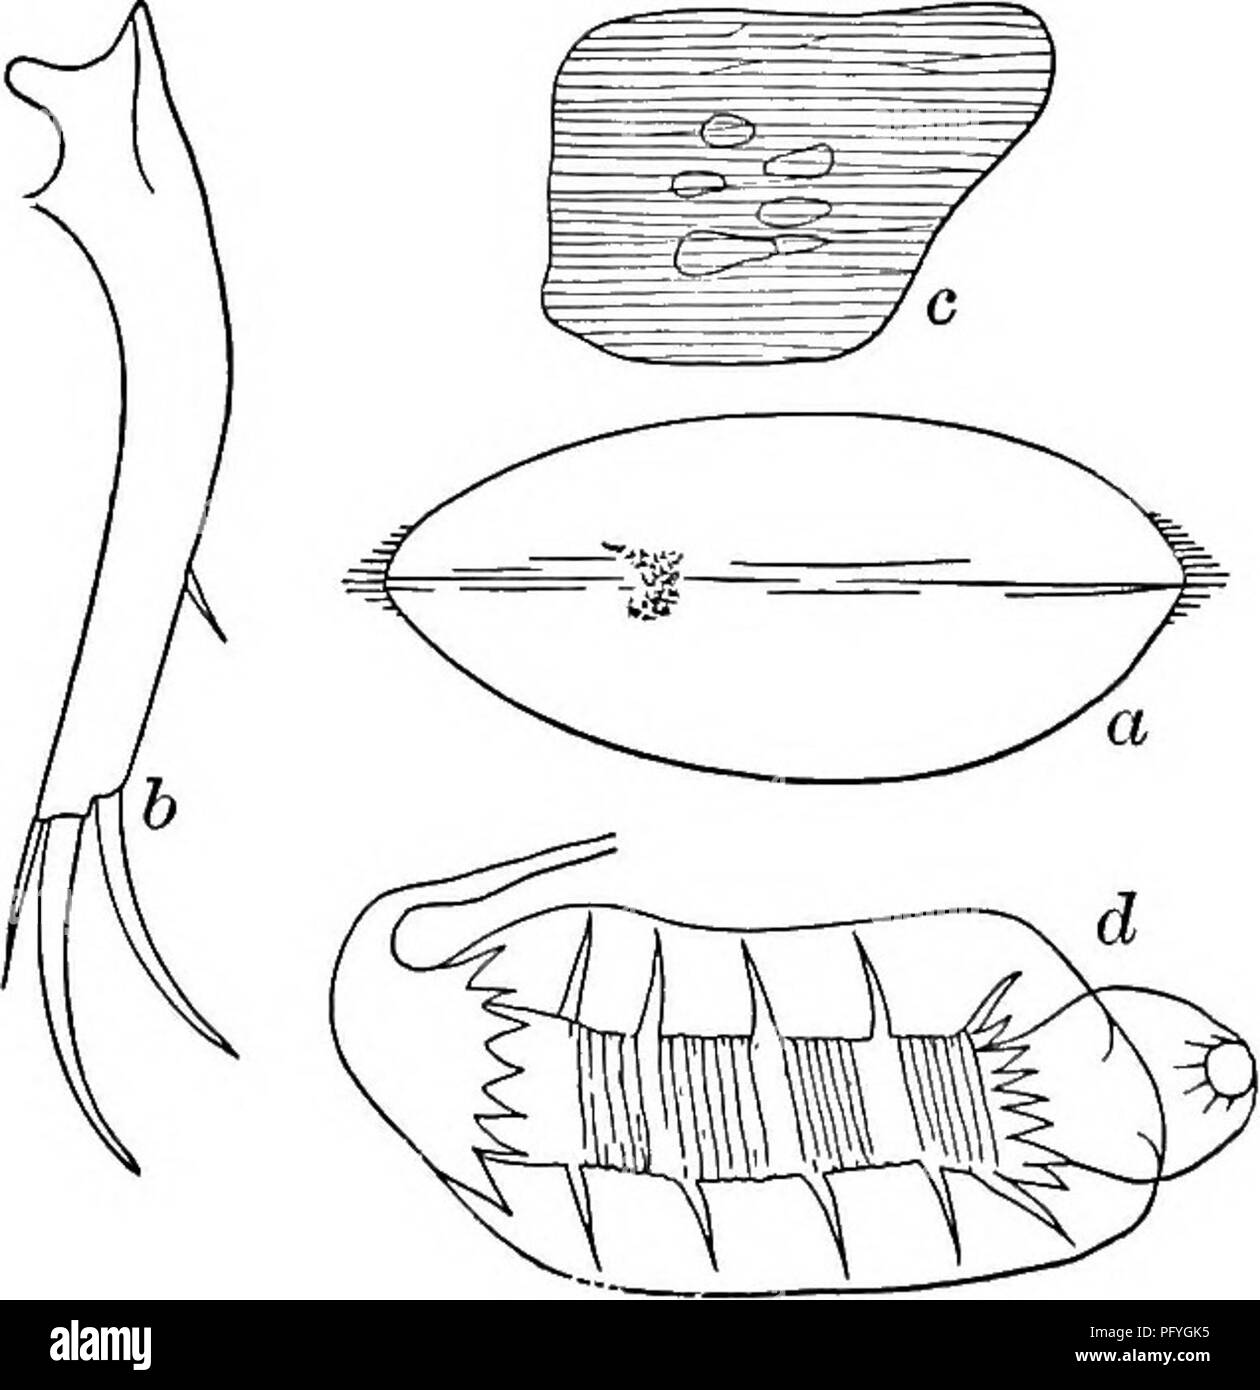 . Fresh-water biology. Freshwater biology. Cypria {Cypria) dmtifera. 83 (84) Shell covered with a close reticulum of longitudinally subparallel lines (Fig. 1283 c). Abdomen without processes. Cypria {Cypria) exsculpta Fischer 1855. Length 0.60 to 0.7s mm., height 0.38 to 0.42 mm., width 0.2s to 0.28 mm. Shell thin, covered with anasto- mosing subparallel lines. Color clear chestnut brown. Common in streams and ponds everywhere. Also com- mon in bottom tows in river chan- nels, lake and river shores. Caudal rami short, stout and much curved; both terminal claws smooth; dorsal setae situated sli Stock Photo